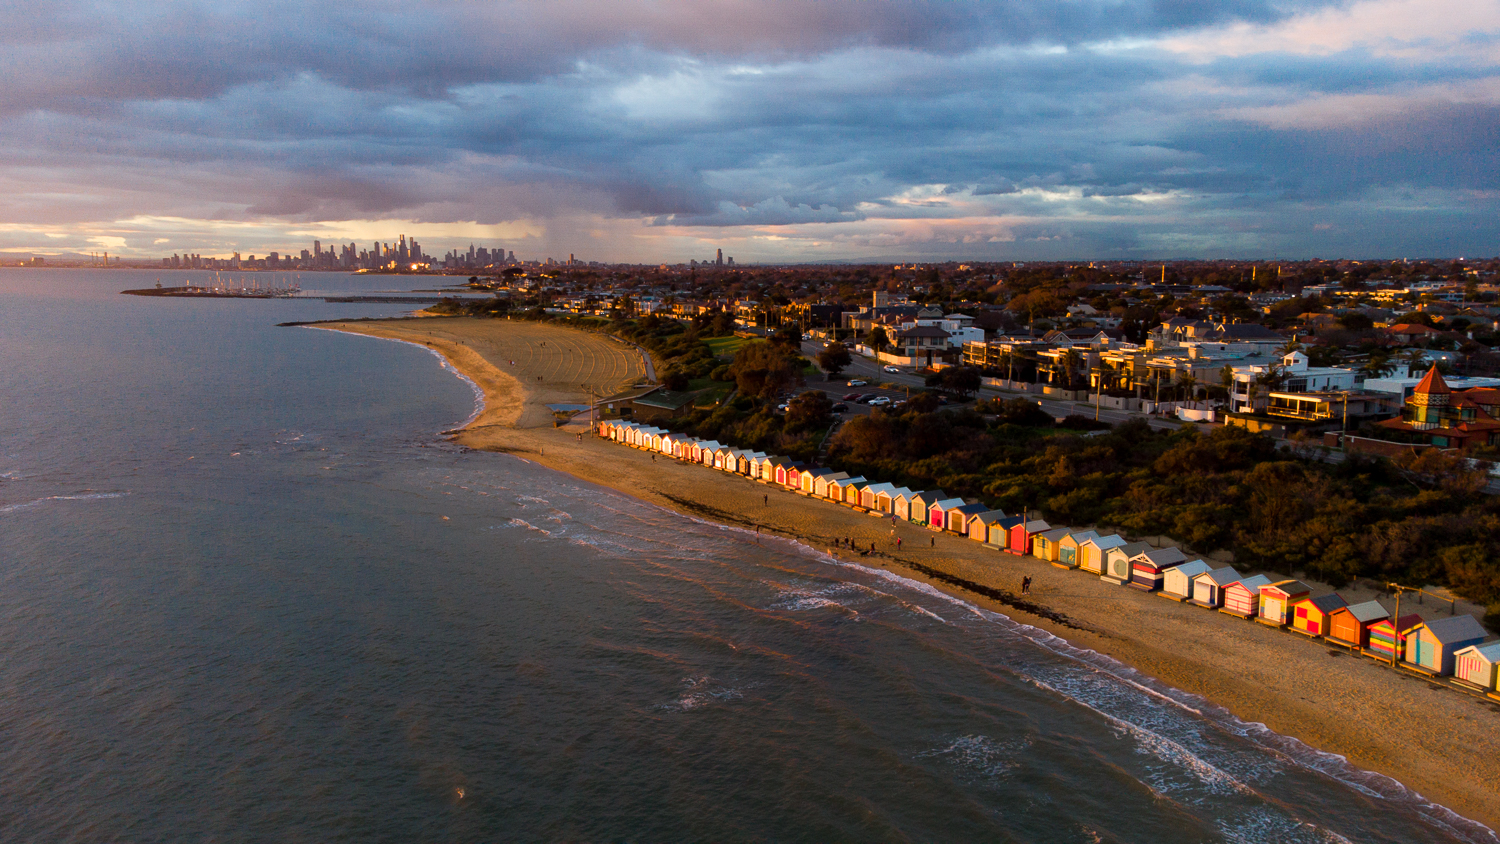 Commercial photo sample of a sunset over bathing boxes at Brighton Beach Melbourne. Photo taken from drone